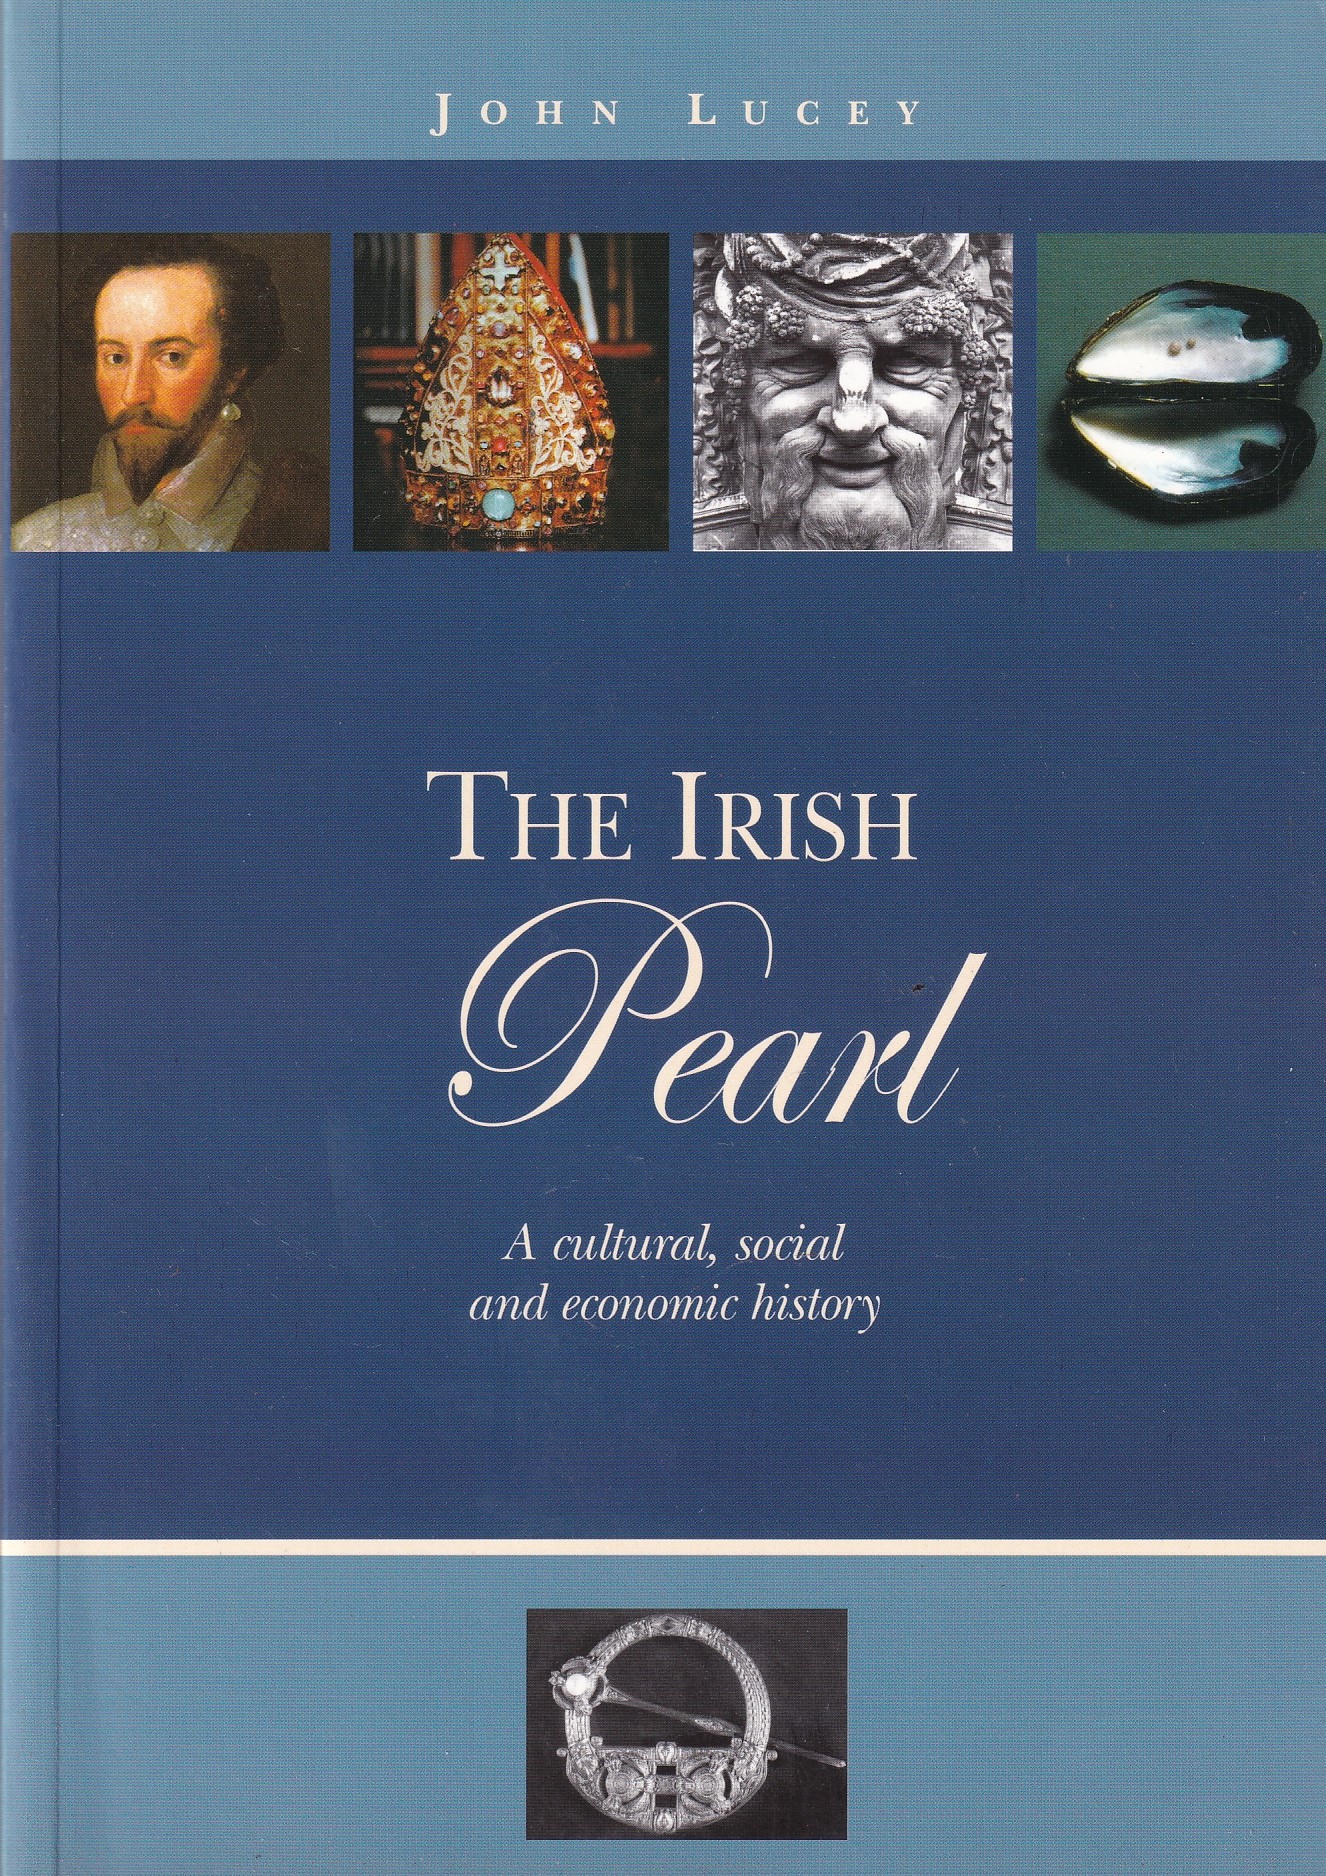 The Irish Pearl: A cultural, social and economic history | John Lucey | Charlie Byrne's